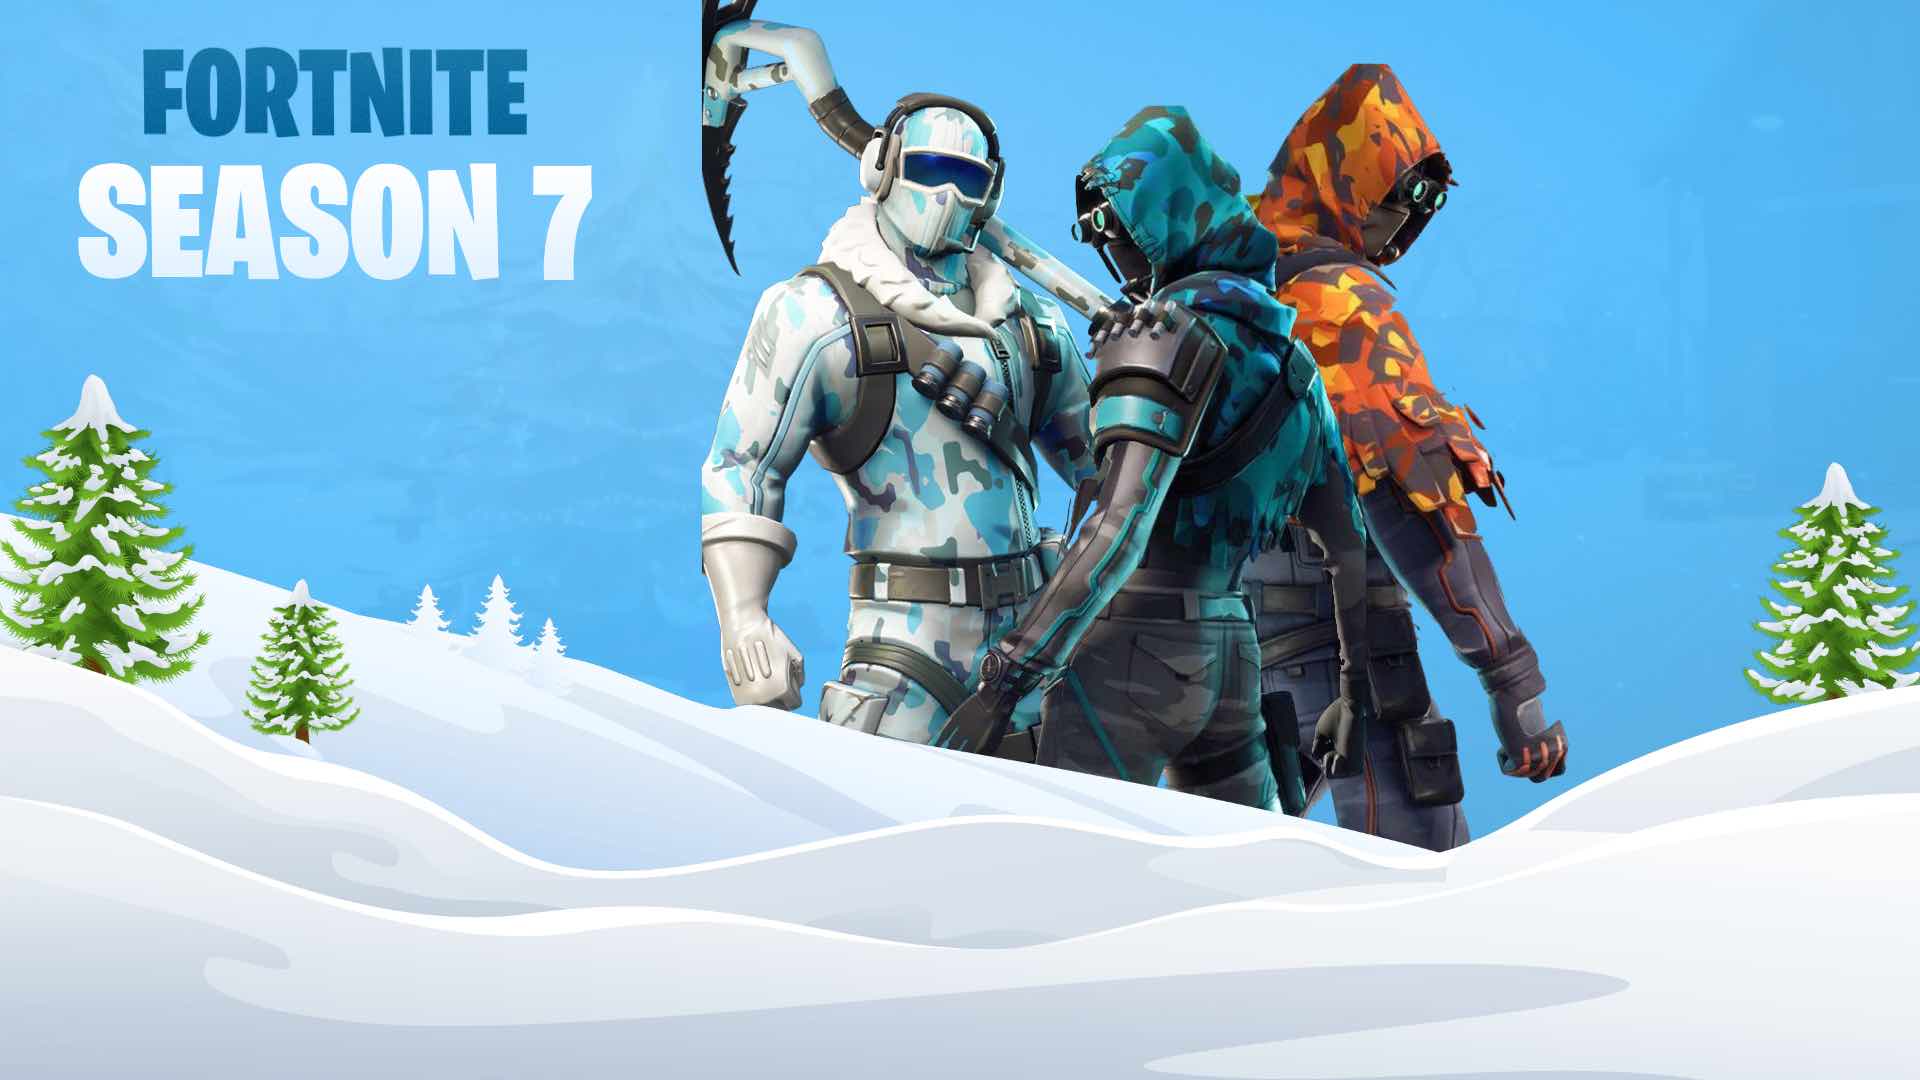 as always data miners have found out the new challenges ahead - is season 7 out on fortnite